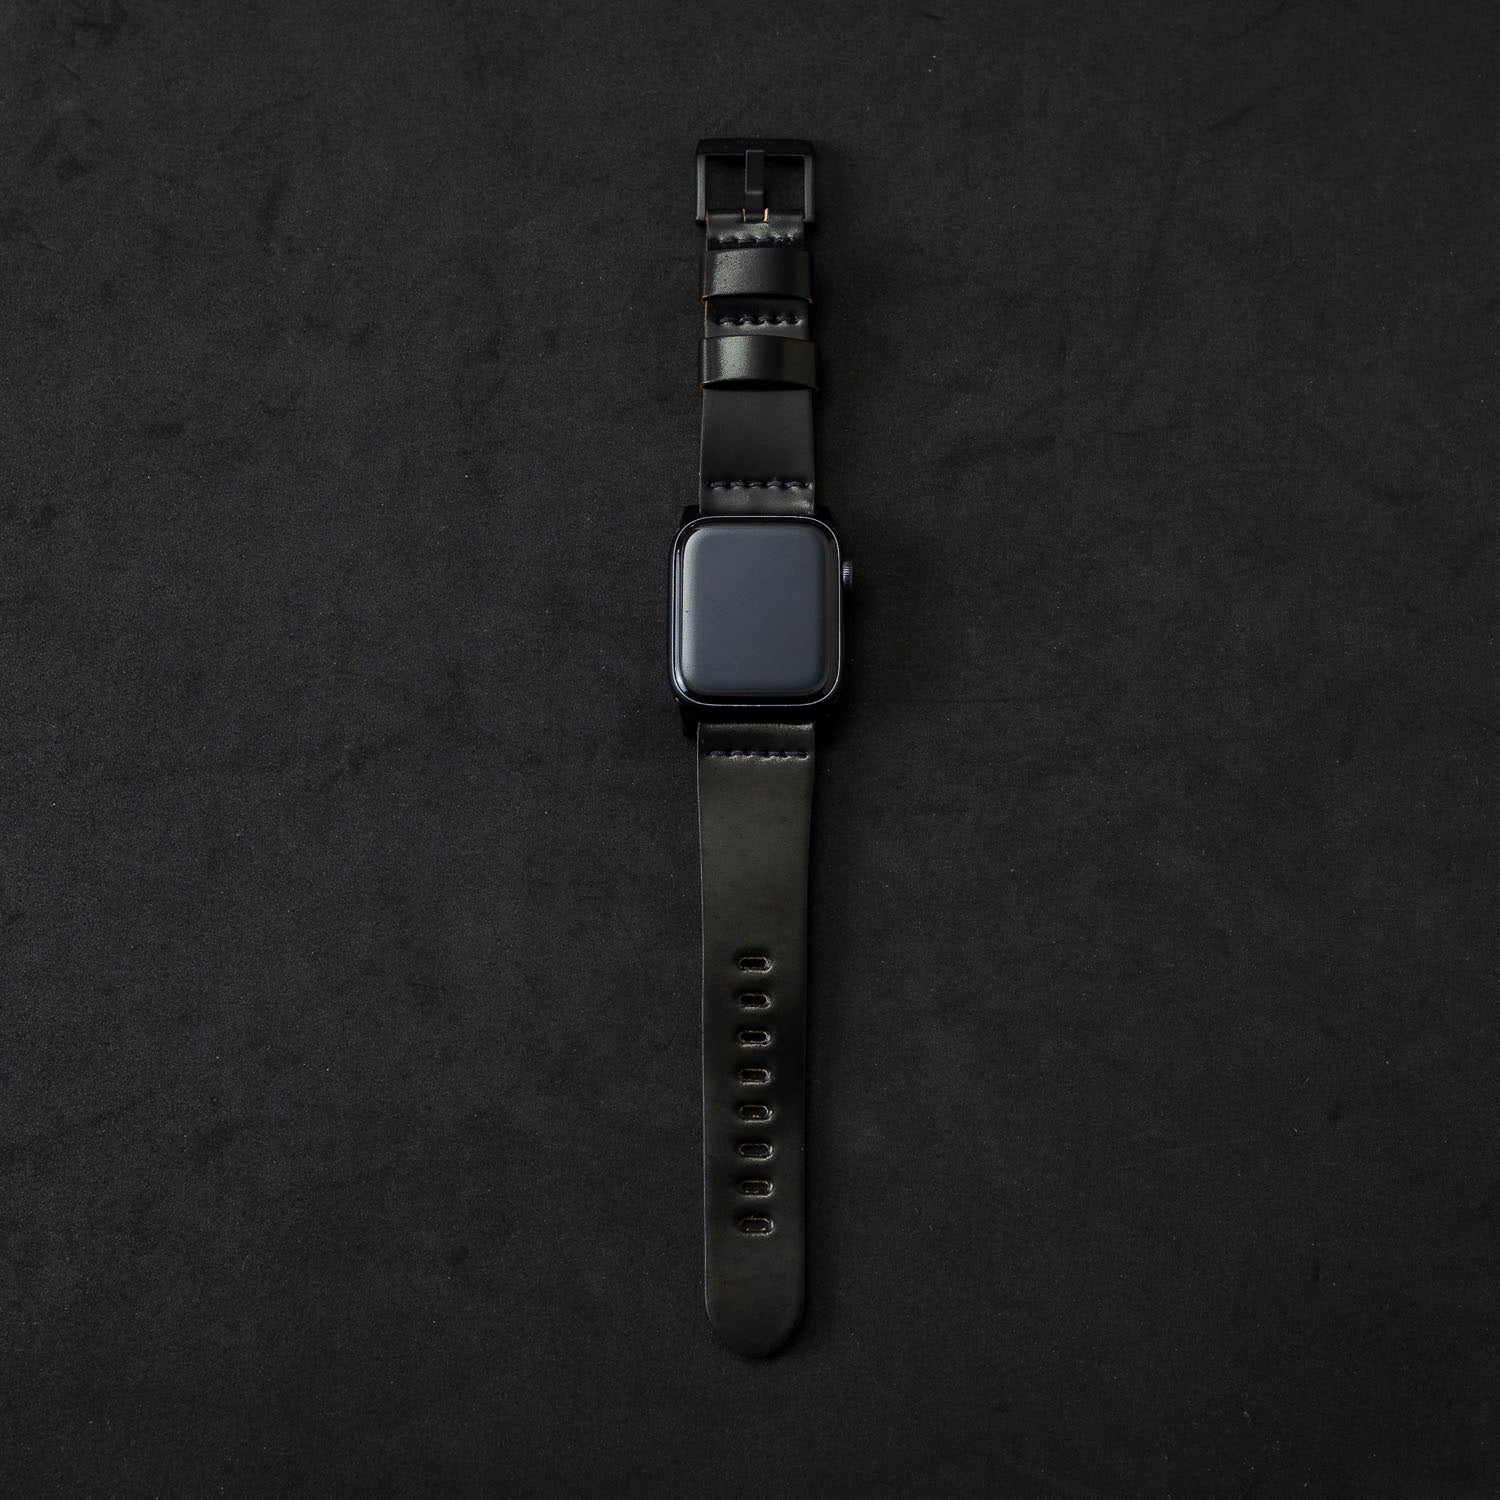 Obsidian Black Leather & Rubber Hybrid Apple Watch Band